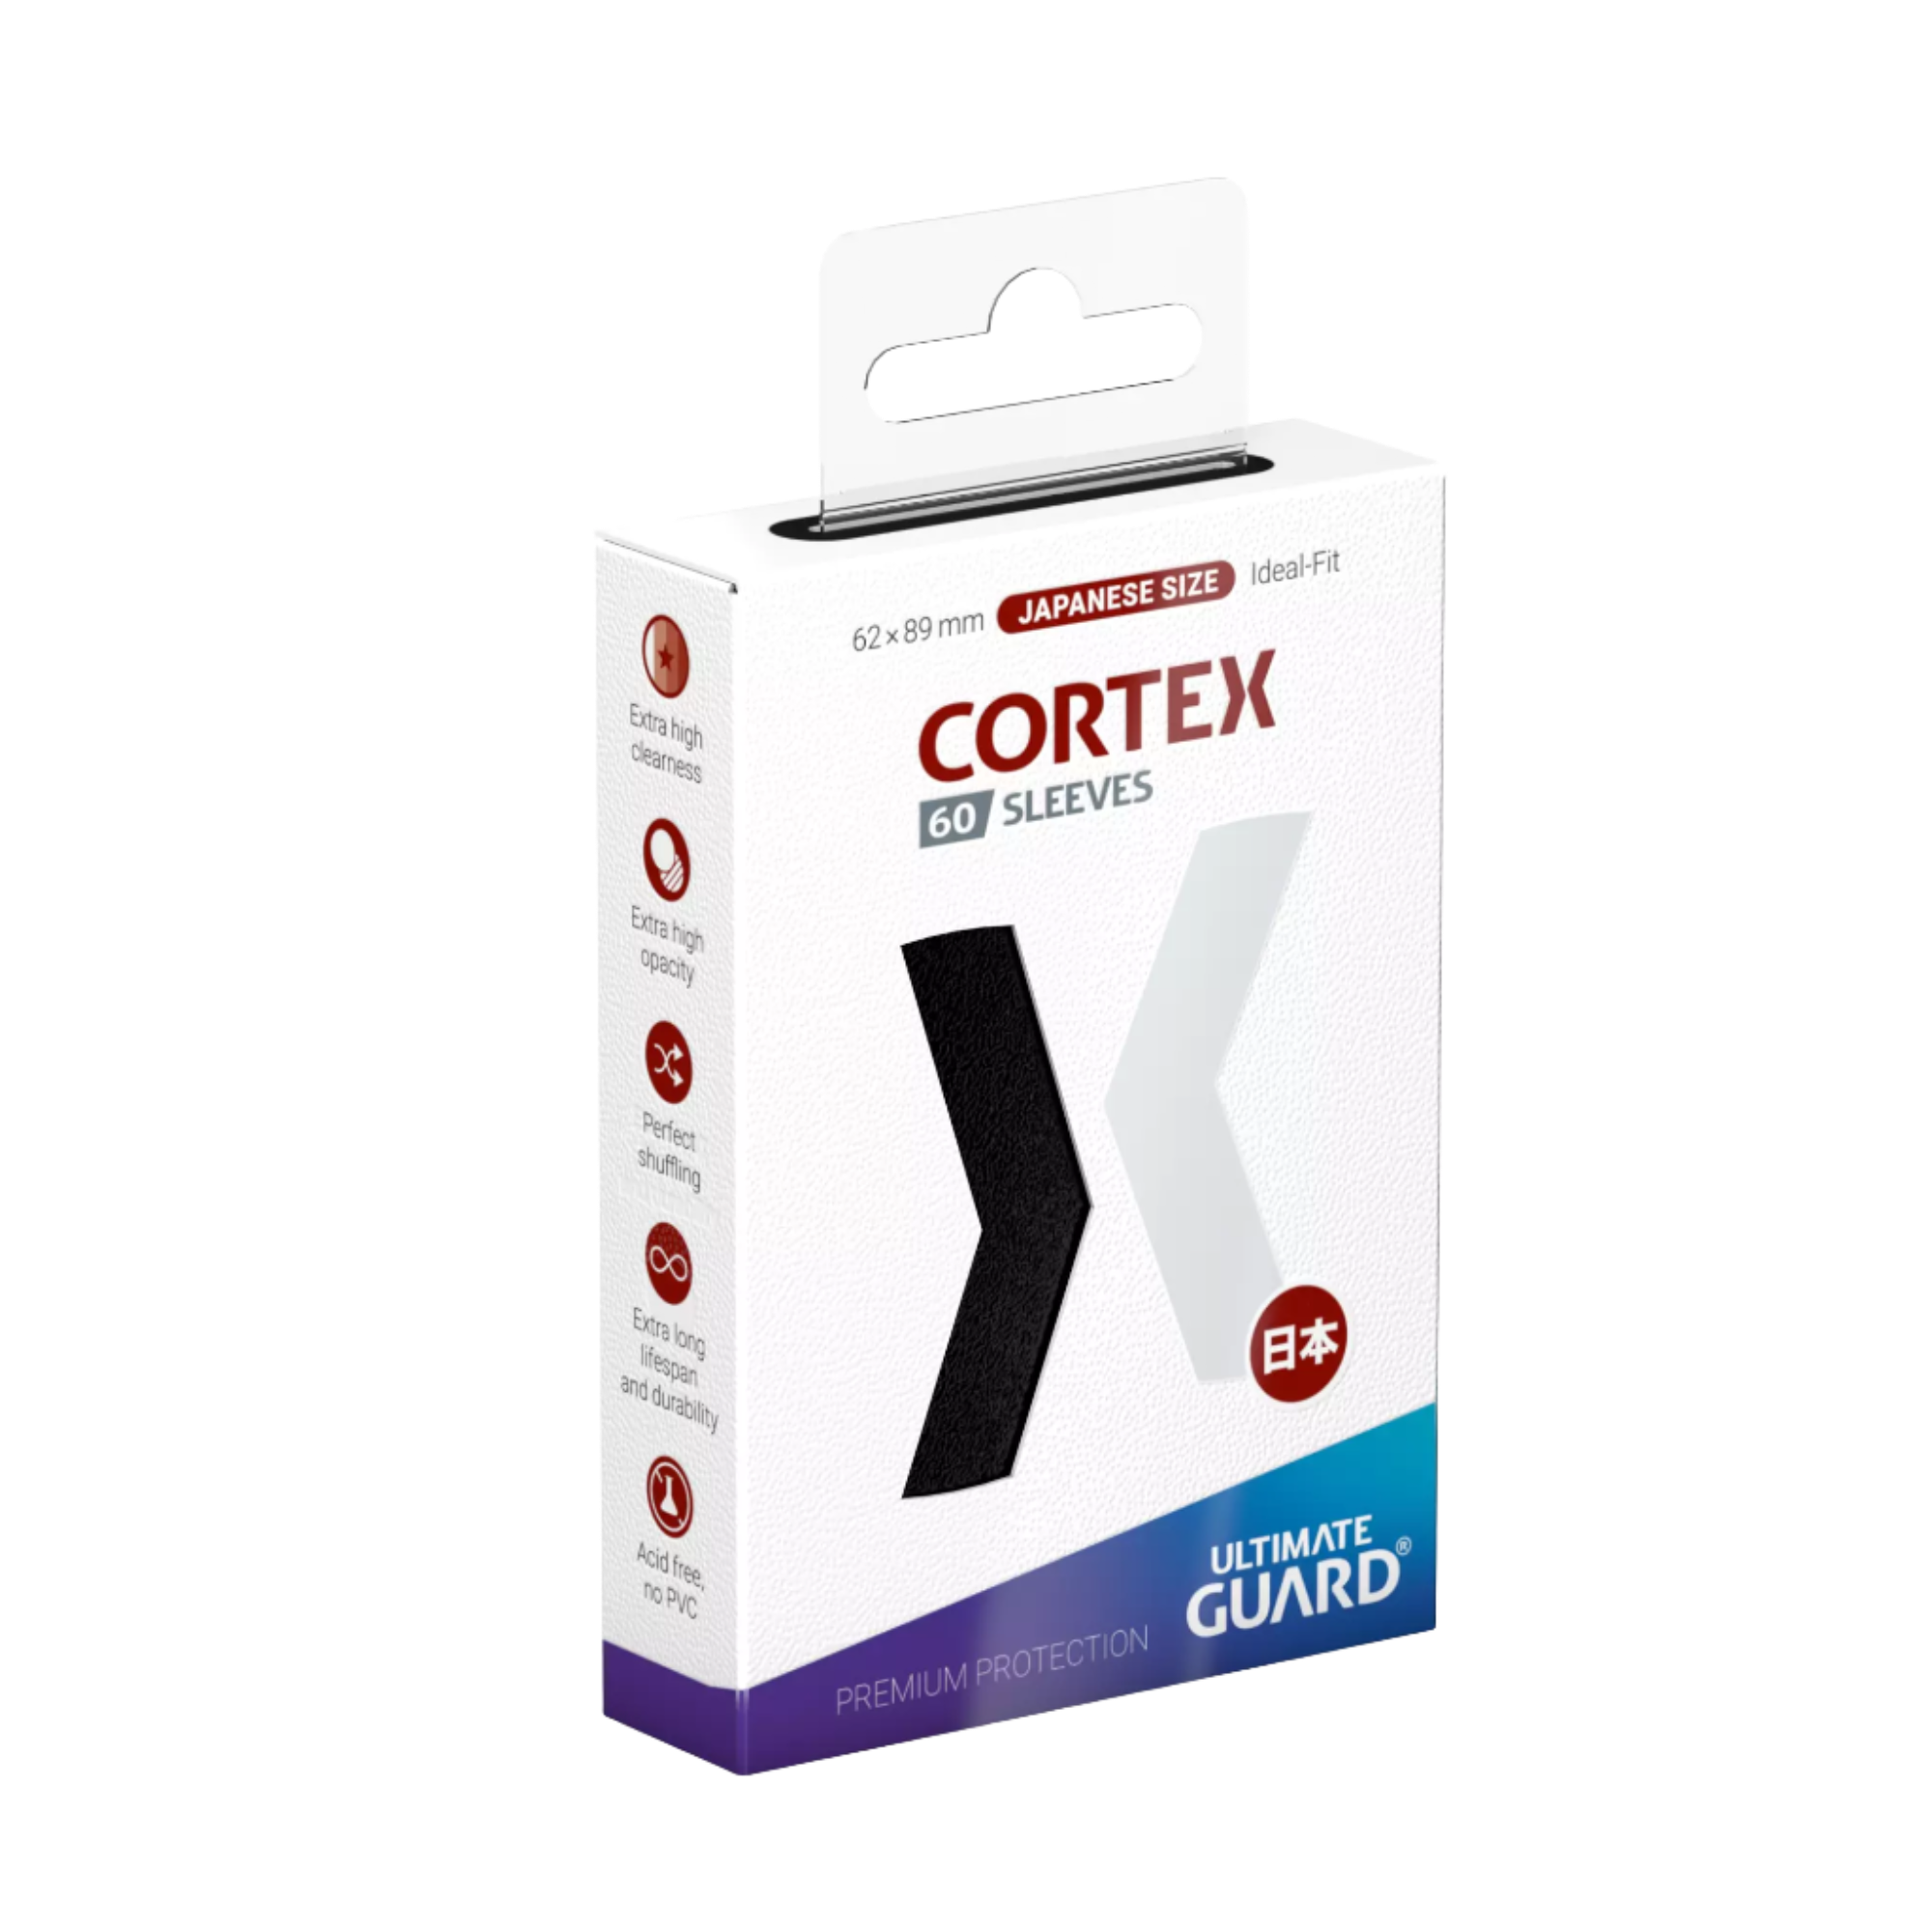 Ultimate Guard - Cortex Sleeves - Japanese Size - Ideal-Fit - Black - 60pk